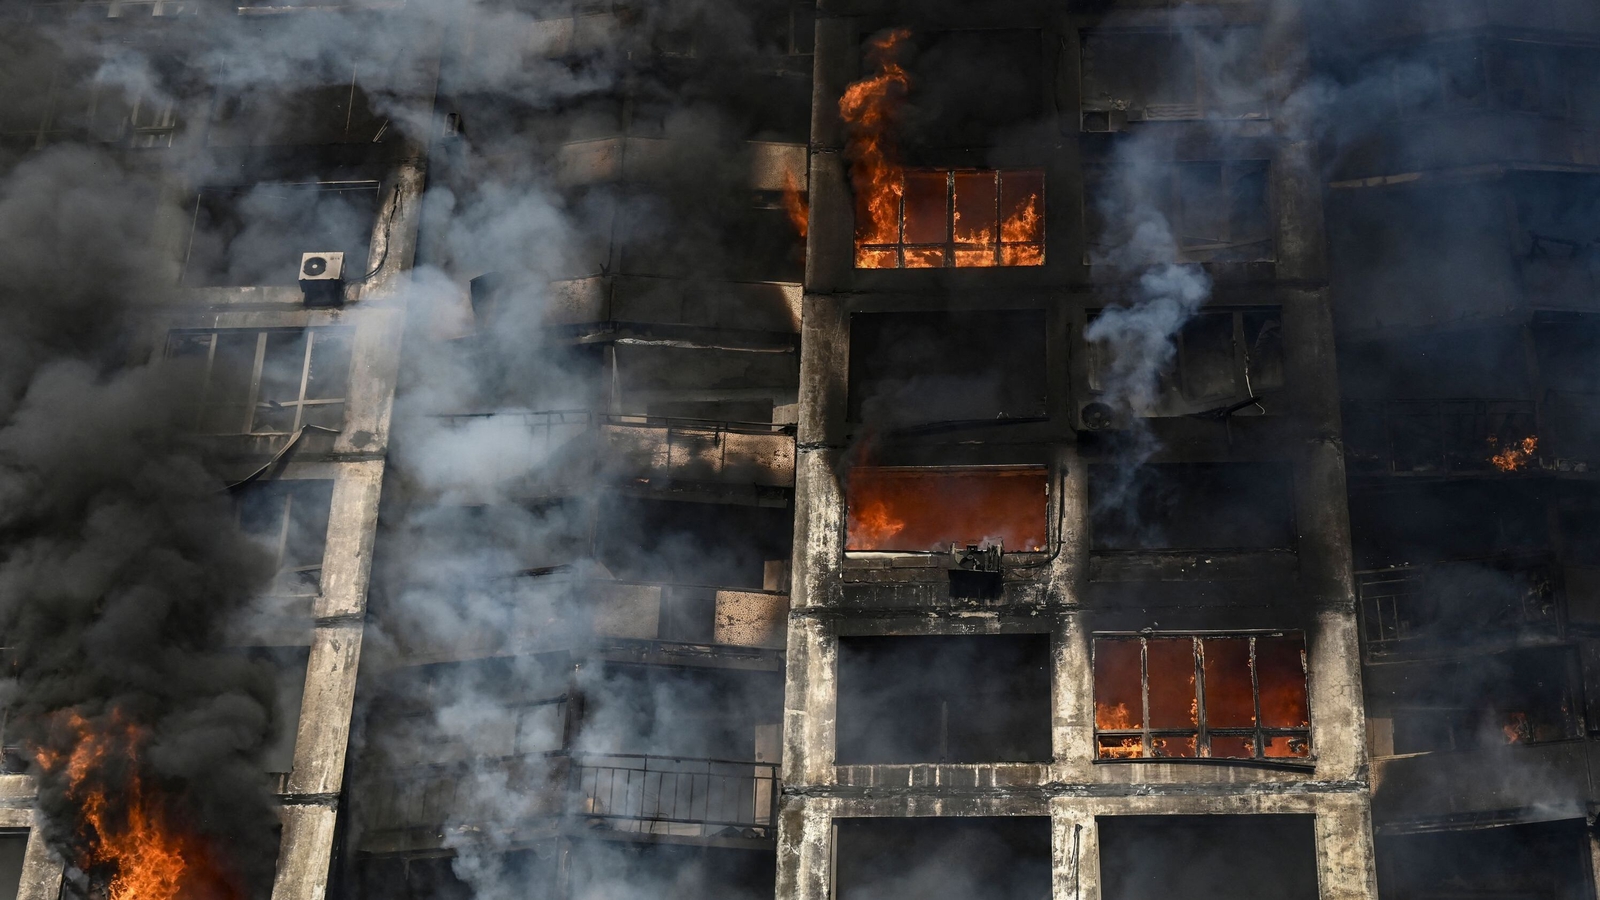 Image - Firefighters extinguish a fire in an apartment building in Kyiv after strikes on residential areas